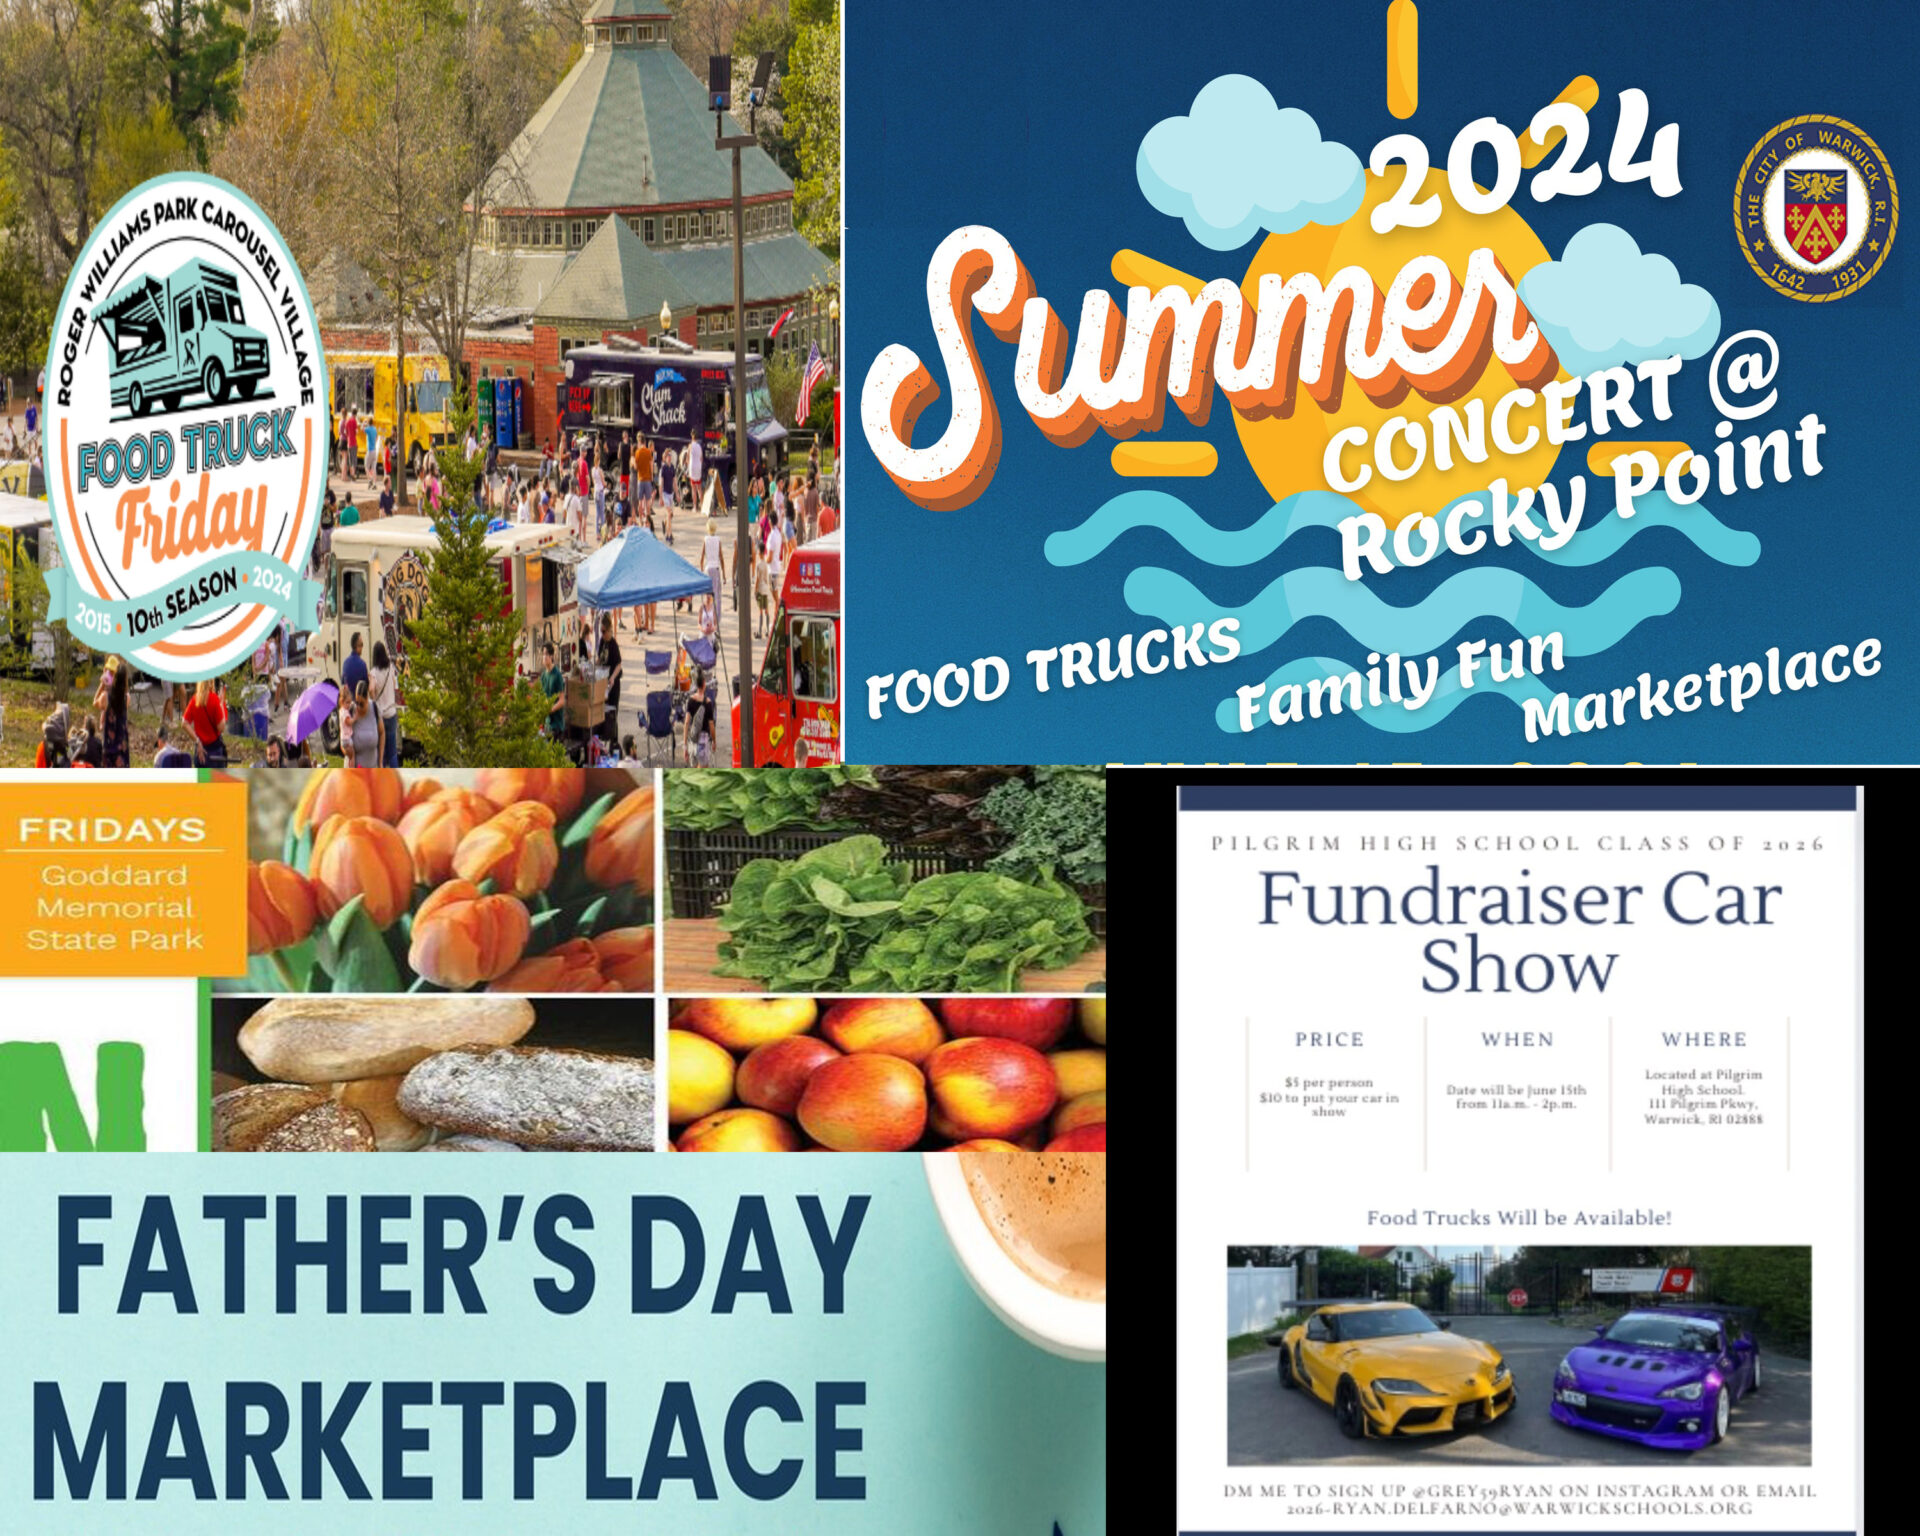 This Father's Day Warwick Weekend events roundup has lots going on Friday and Saturday, including a marketplace to shop for the holiday.